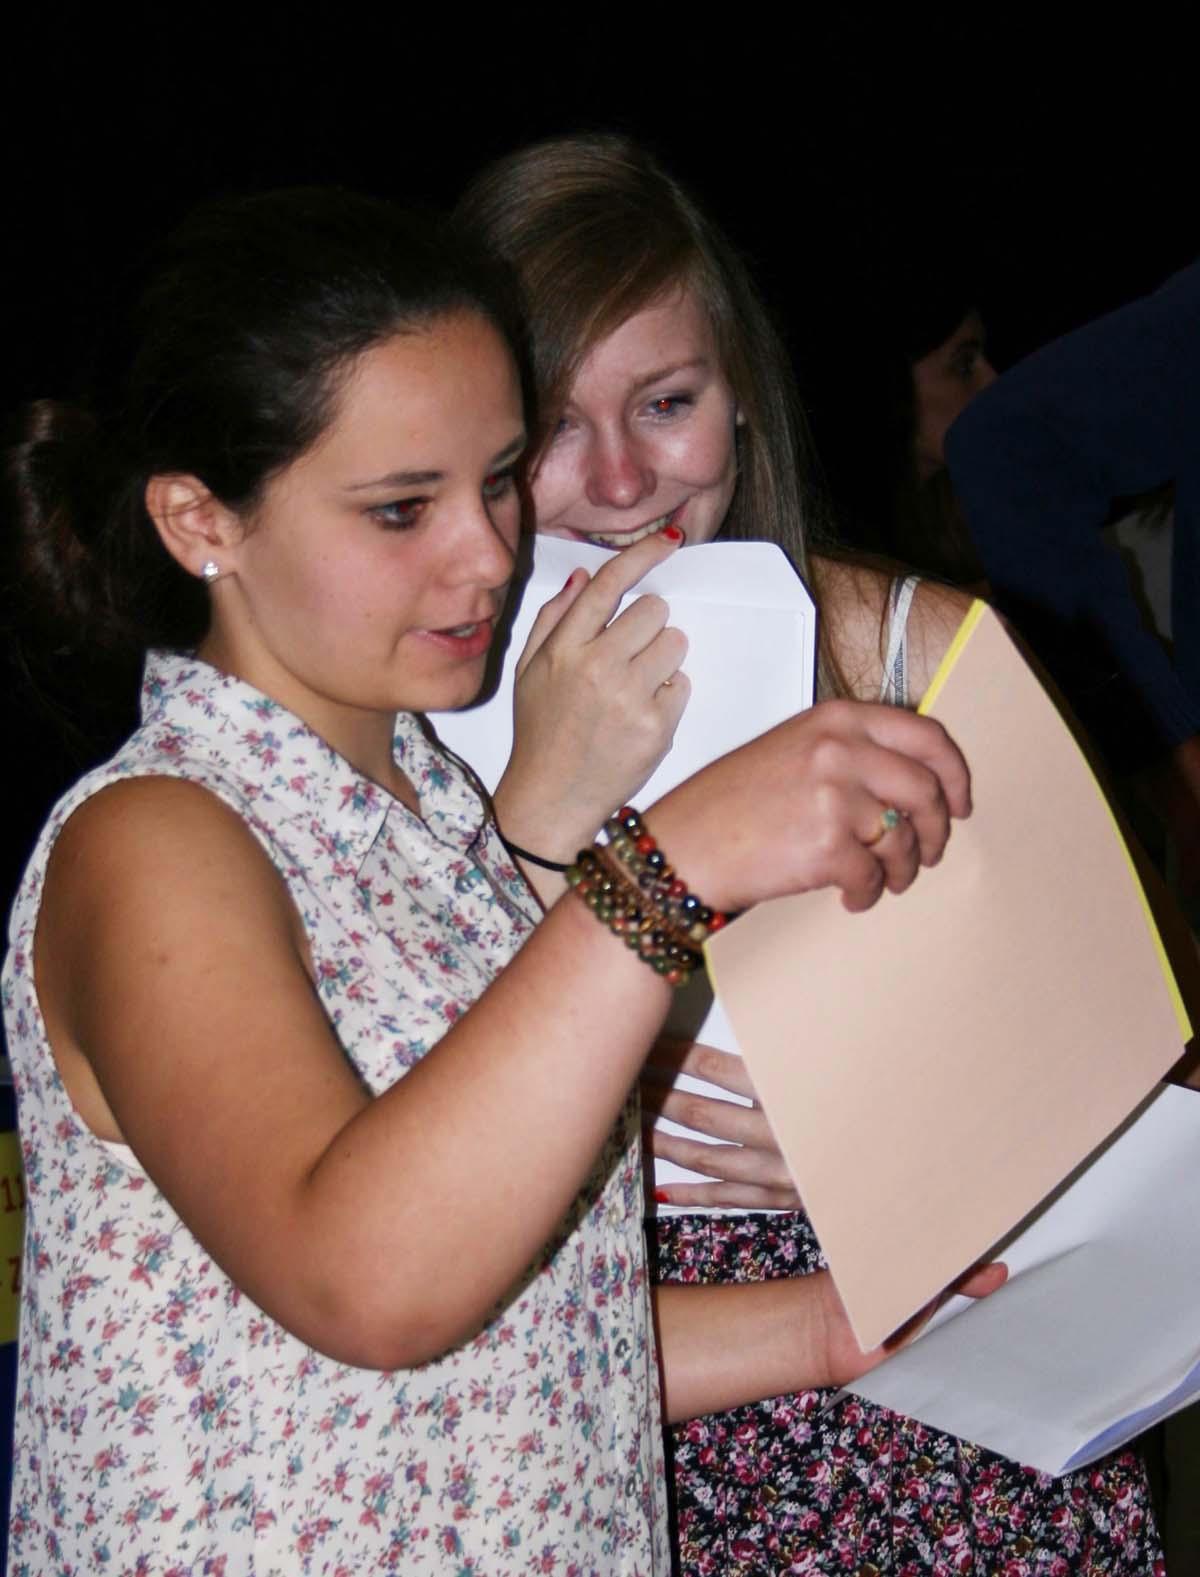 Students from around Oxfordshire receiving their GCSE results on 22 August 2013